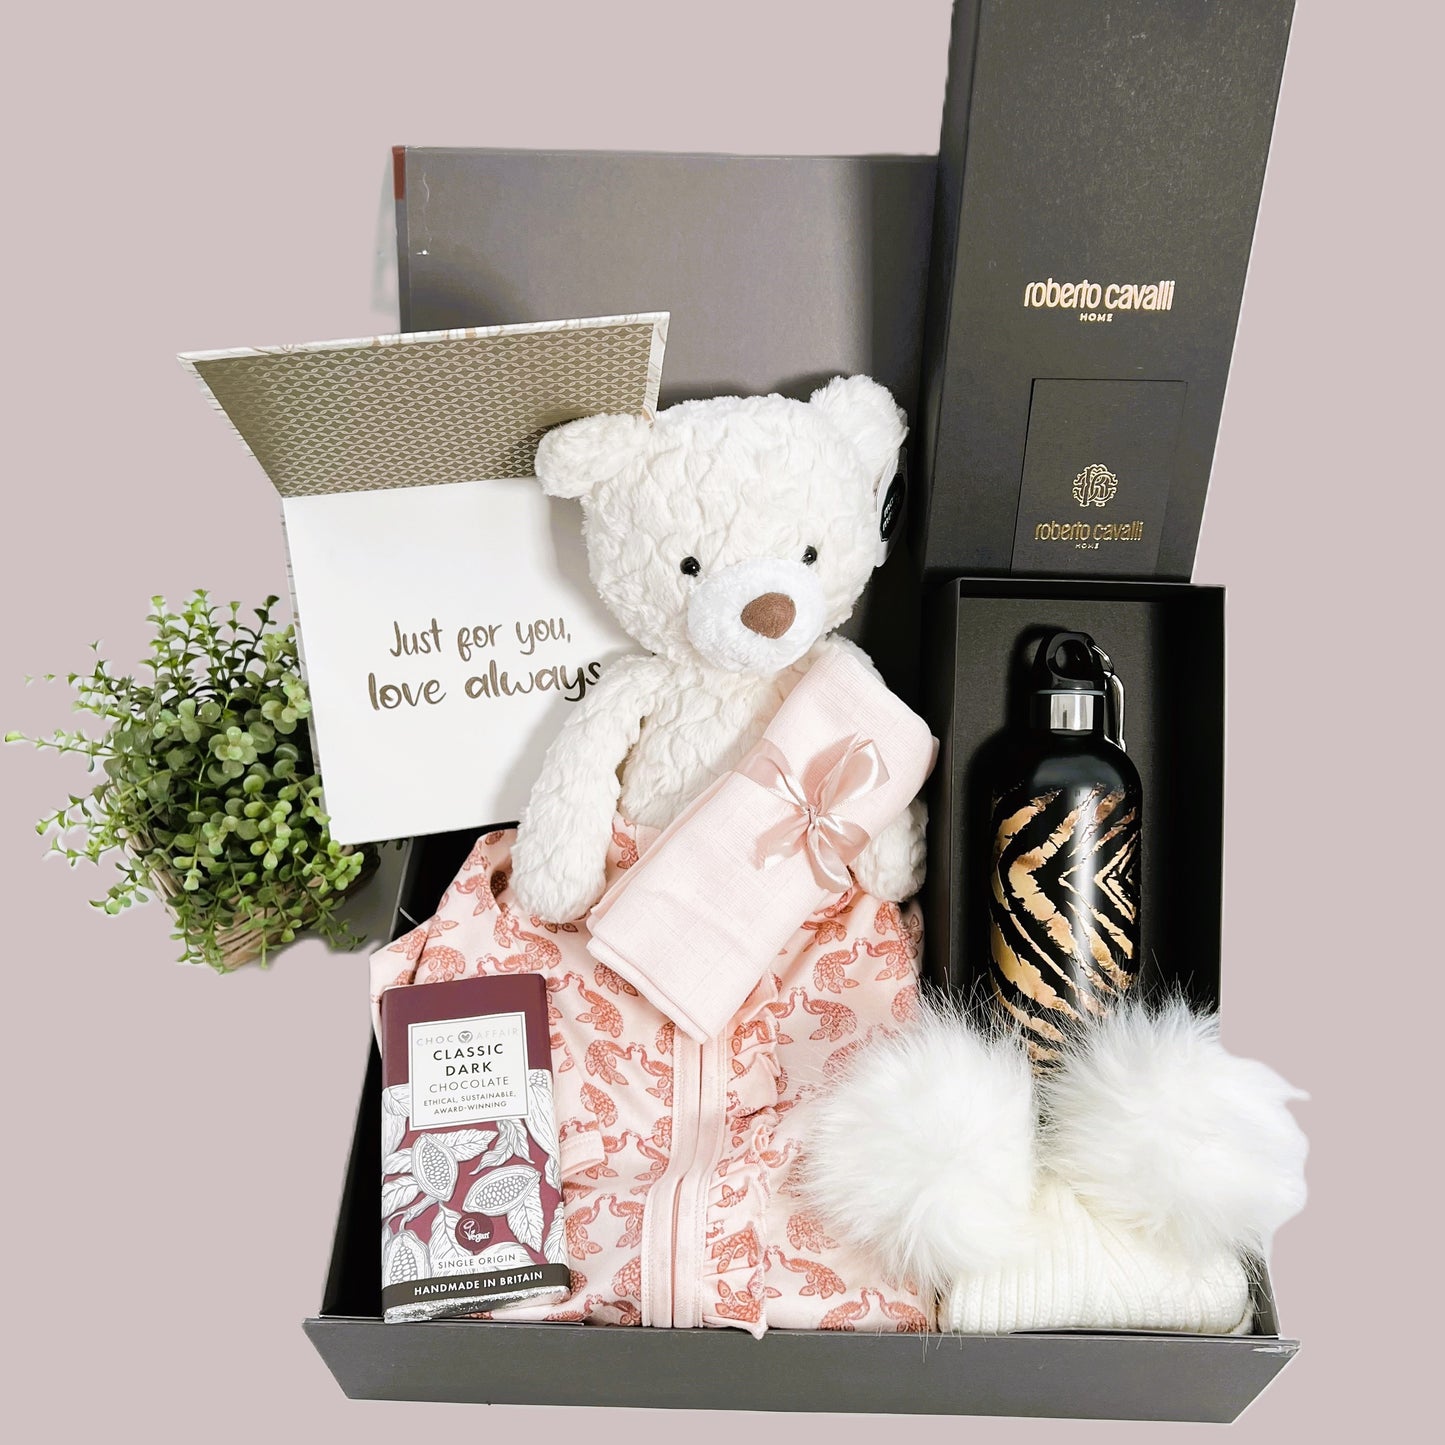 New Parents gift, this baby girl hamper comes in a grey baby keepsake box containing  a Roberto Cavelli wtaer bottle, an organic zipped baby sleepsuit, a Mary Meyer cream Teddy bear, a handcrafted baby journal, a baby pompom hat and a bar of Choc Affair chocolate.